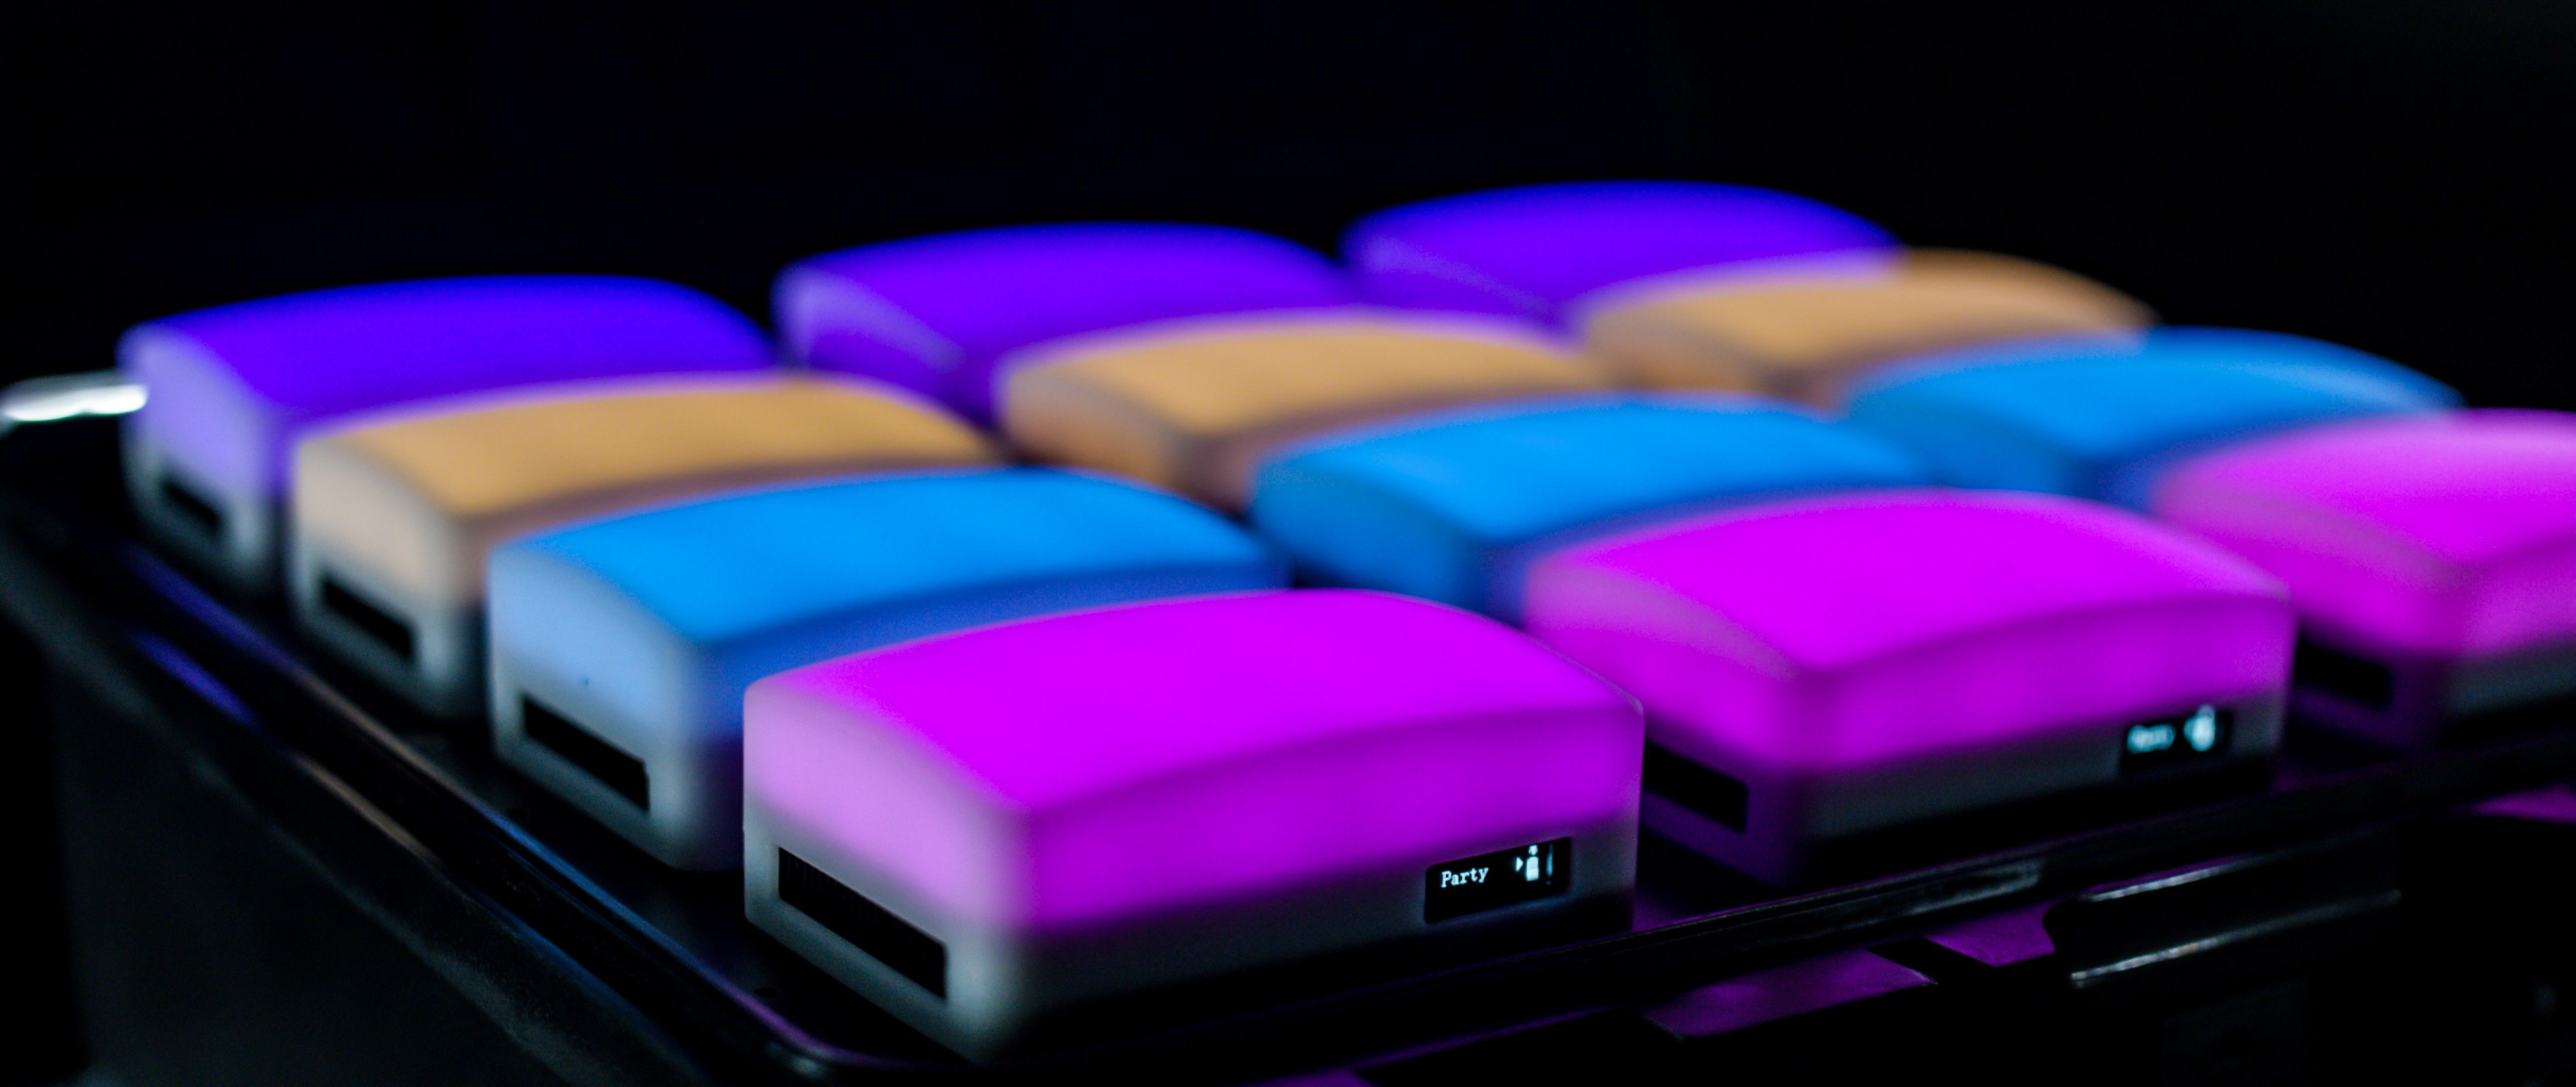 Aputure MC Allows You to Light With Any Color You Want